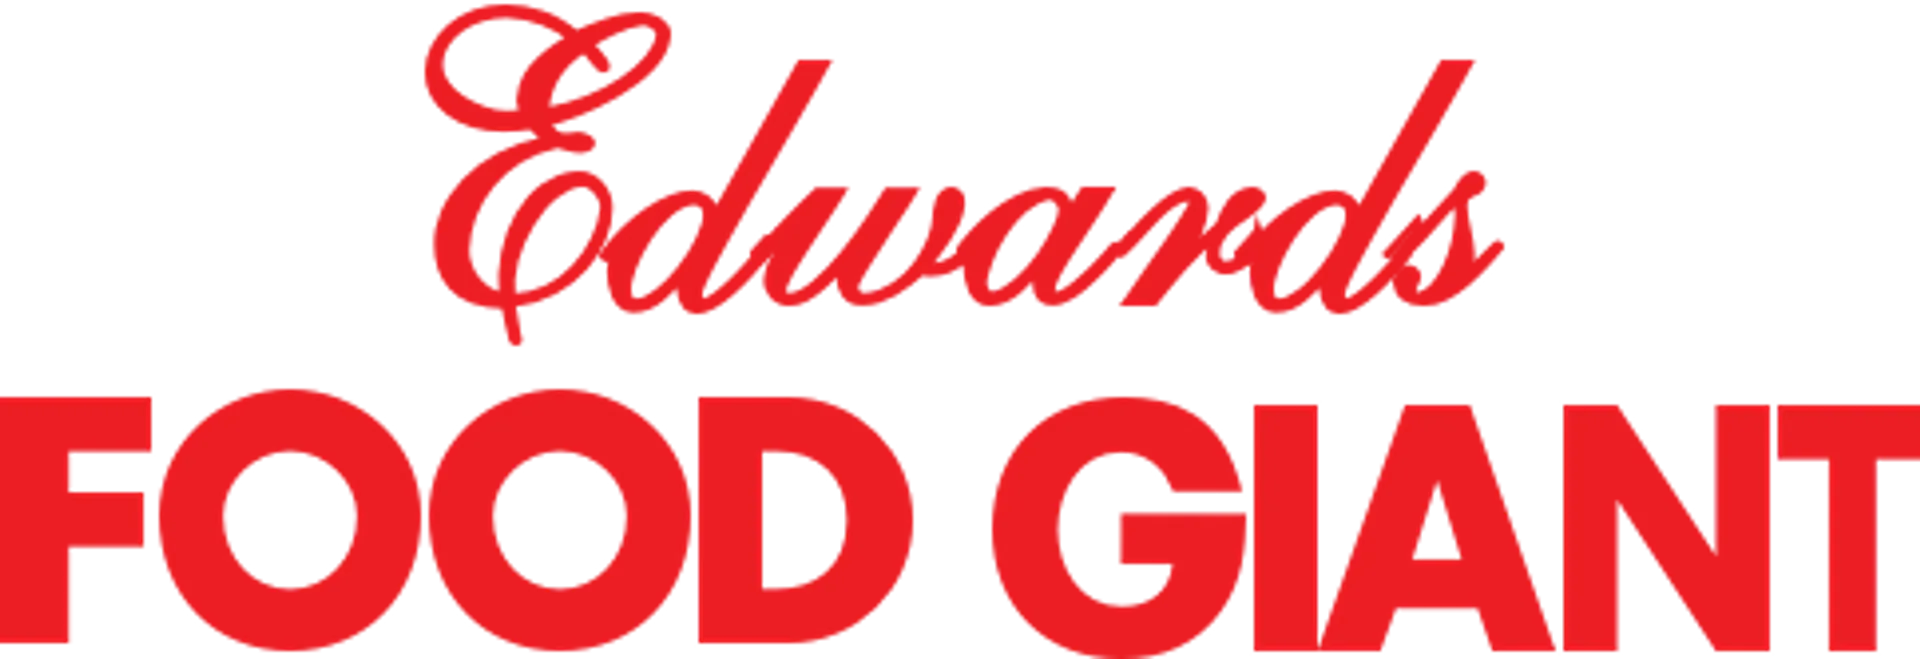 EDWARDS FOOD GIANT logo current weekly ad